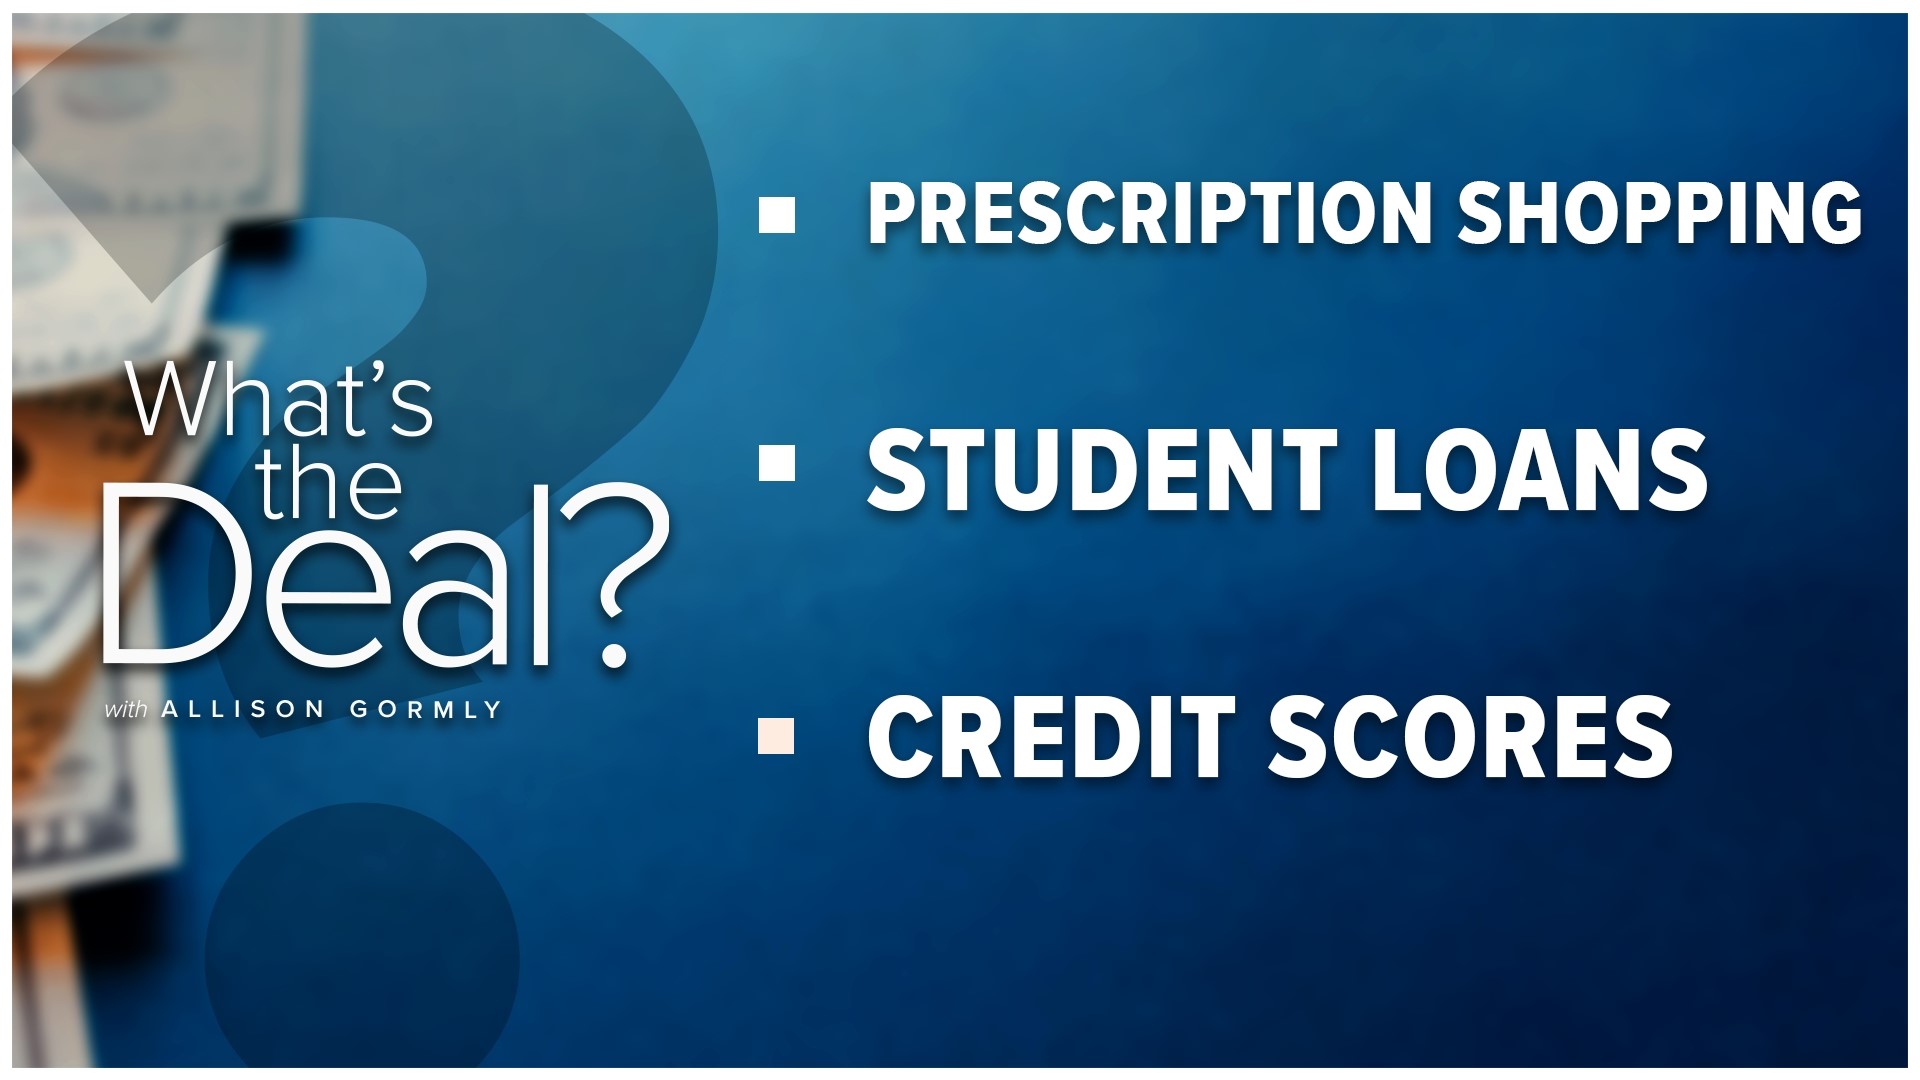 Explaining what you need to know when it comes to shopping around for deals on prescriptions, how to get off your child's student loans and advice on credit scores.